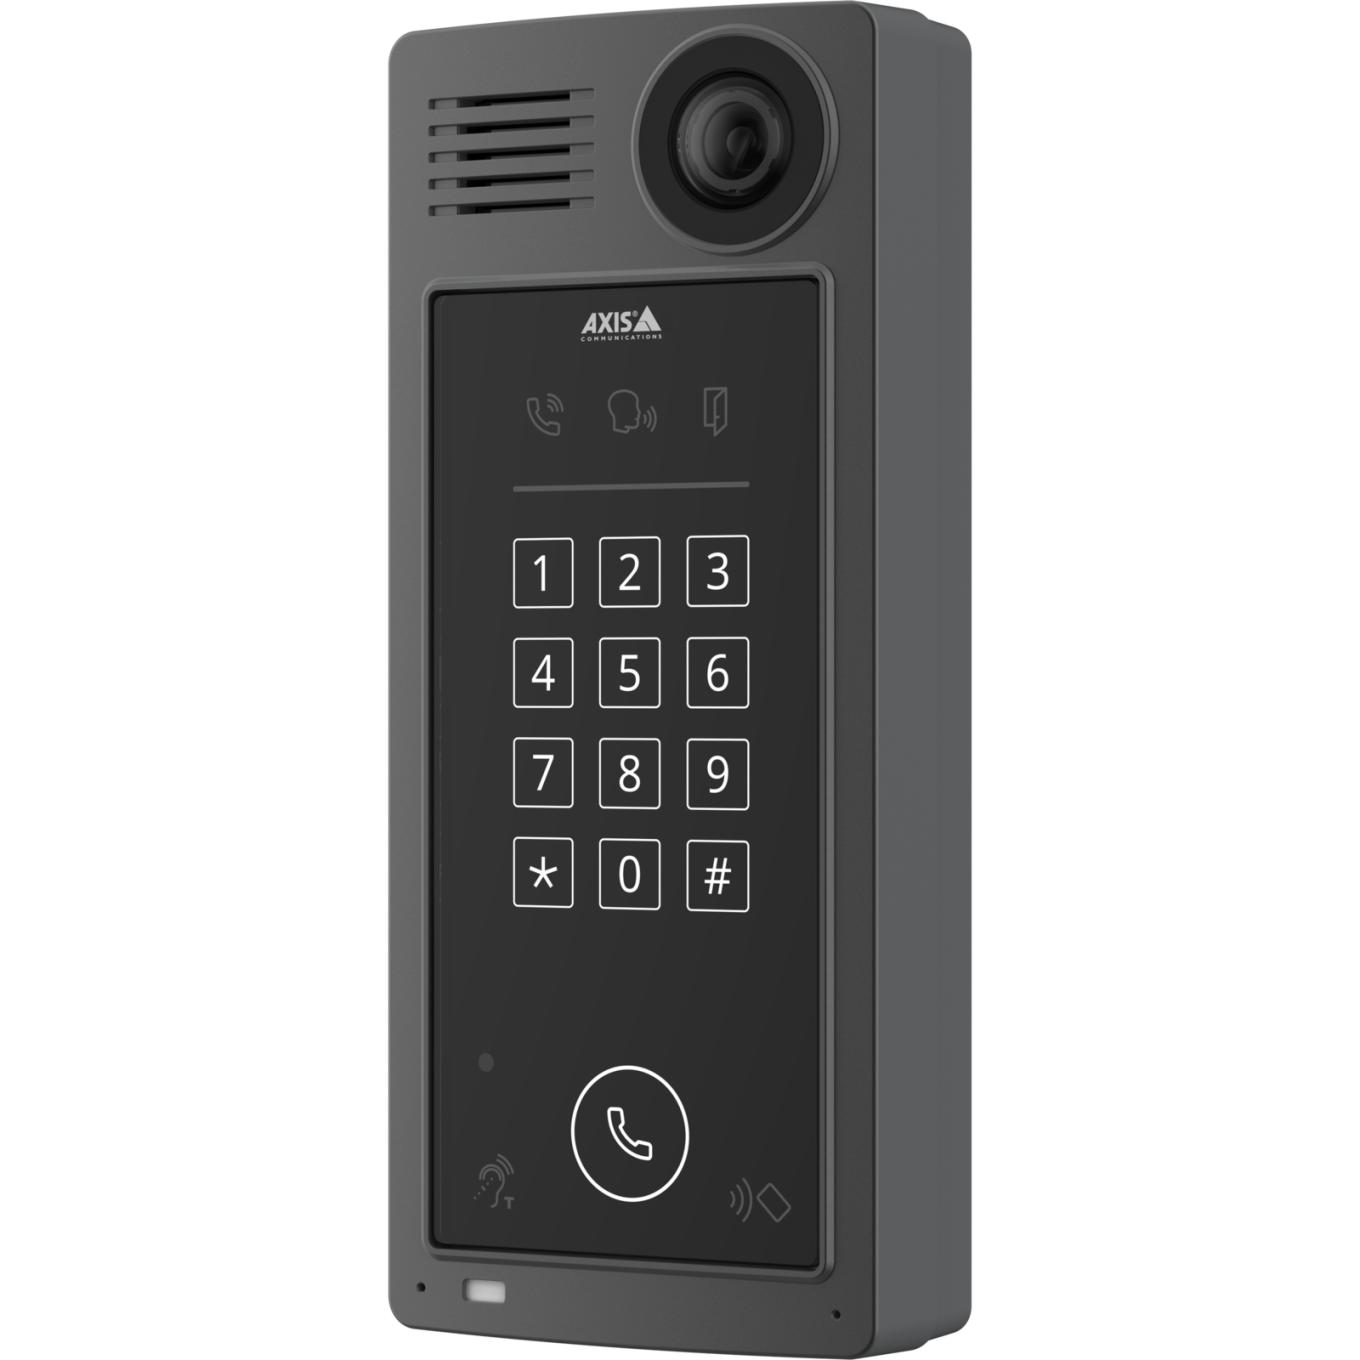 AXIS A8207-VE Mk II Network Video Door Station | Axis Communications